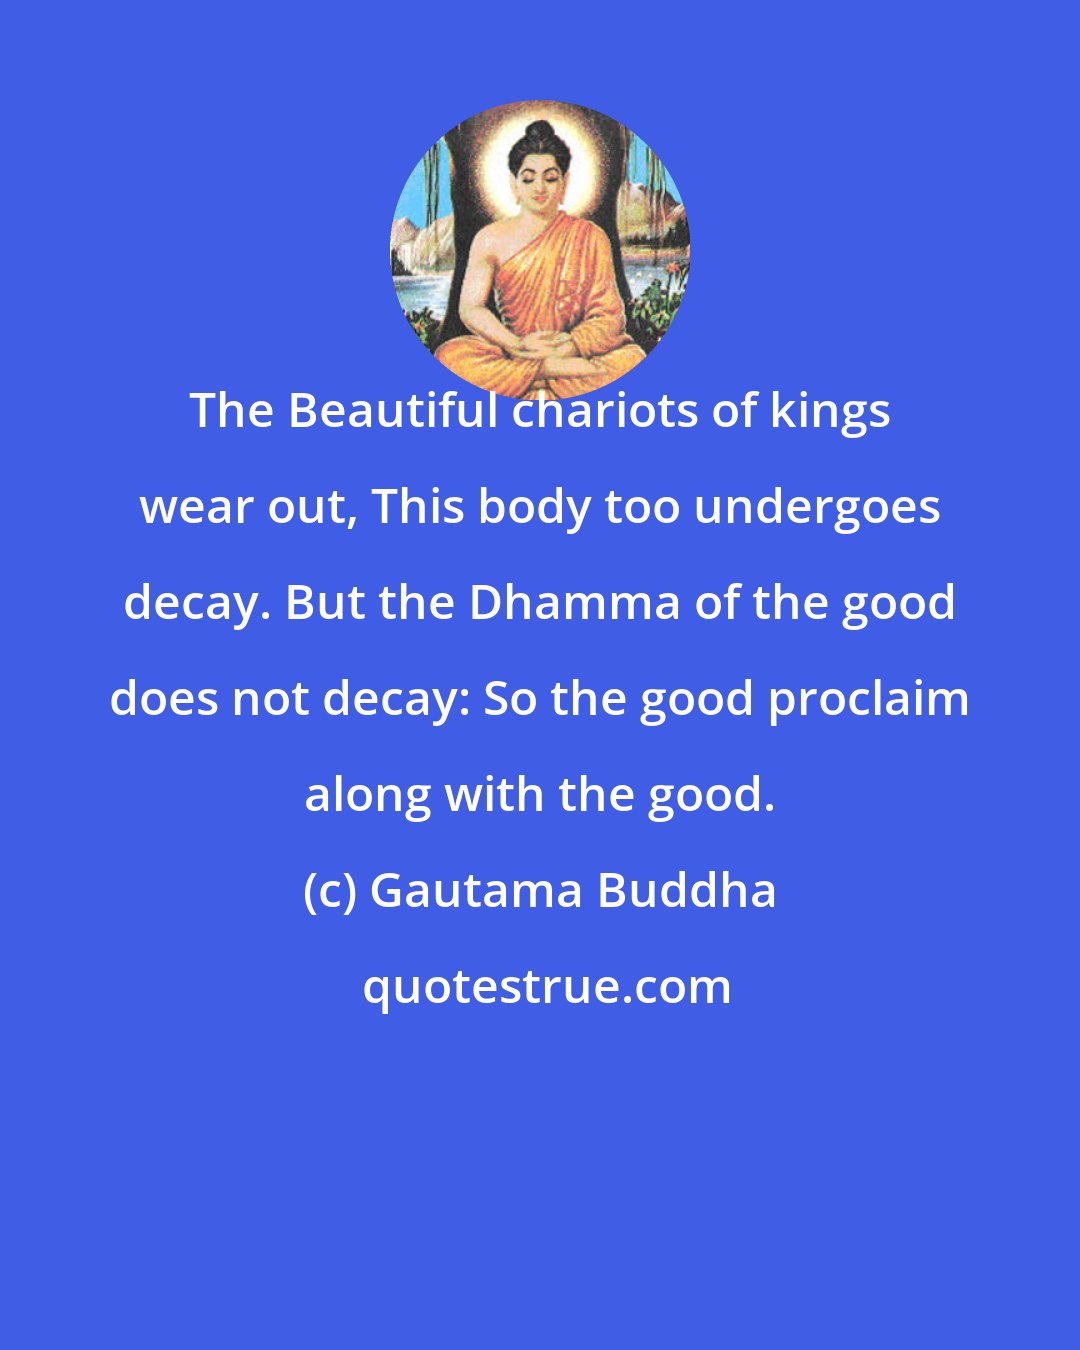 Gautama Buddha: The Beautiful chariots of kings wear out, This body too undergoes decay. But the Dhamma of the good does not decay: So the good proclaim along with the good.